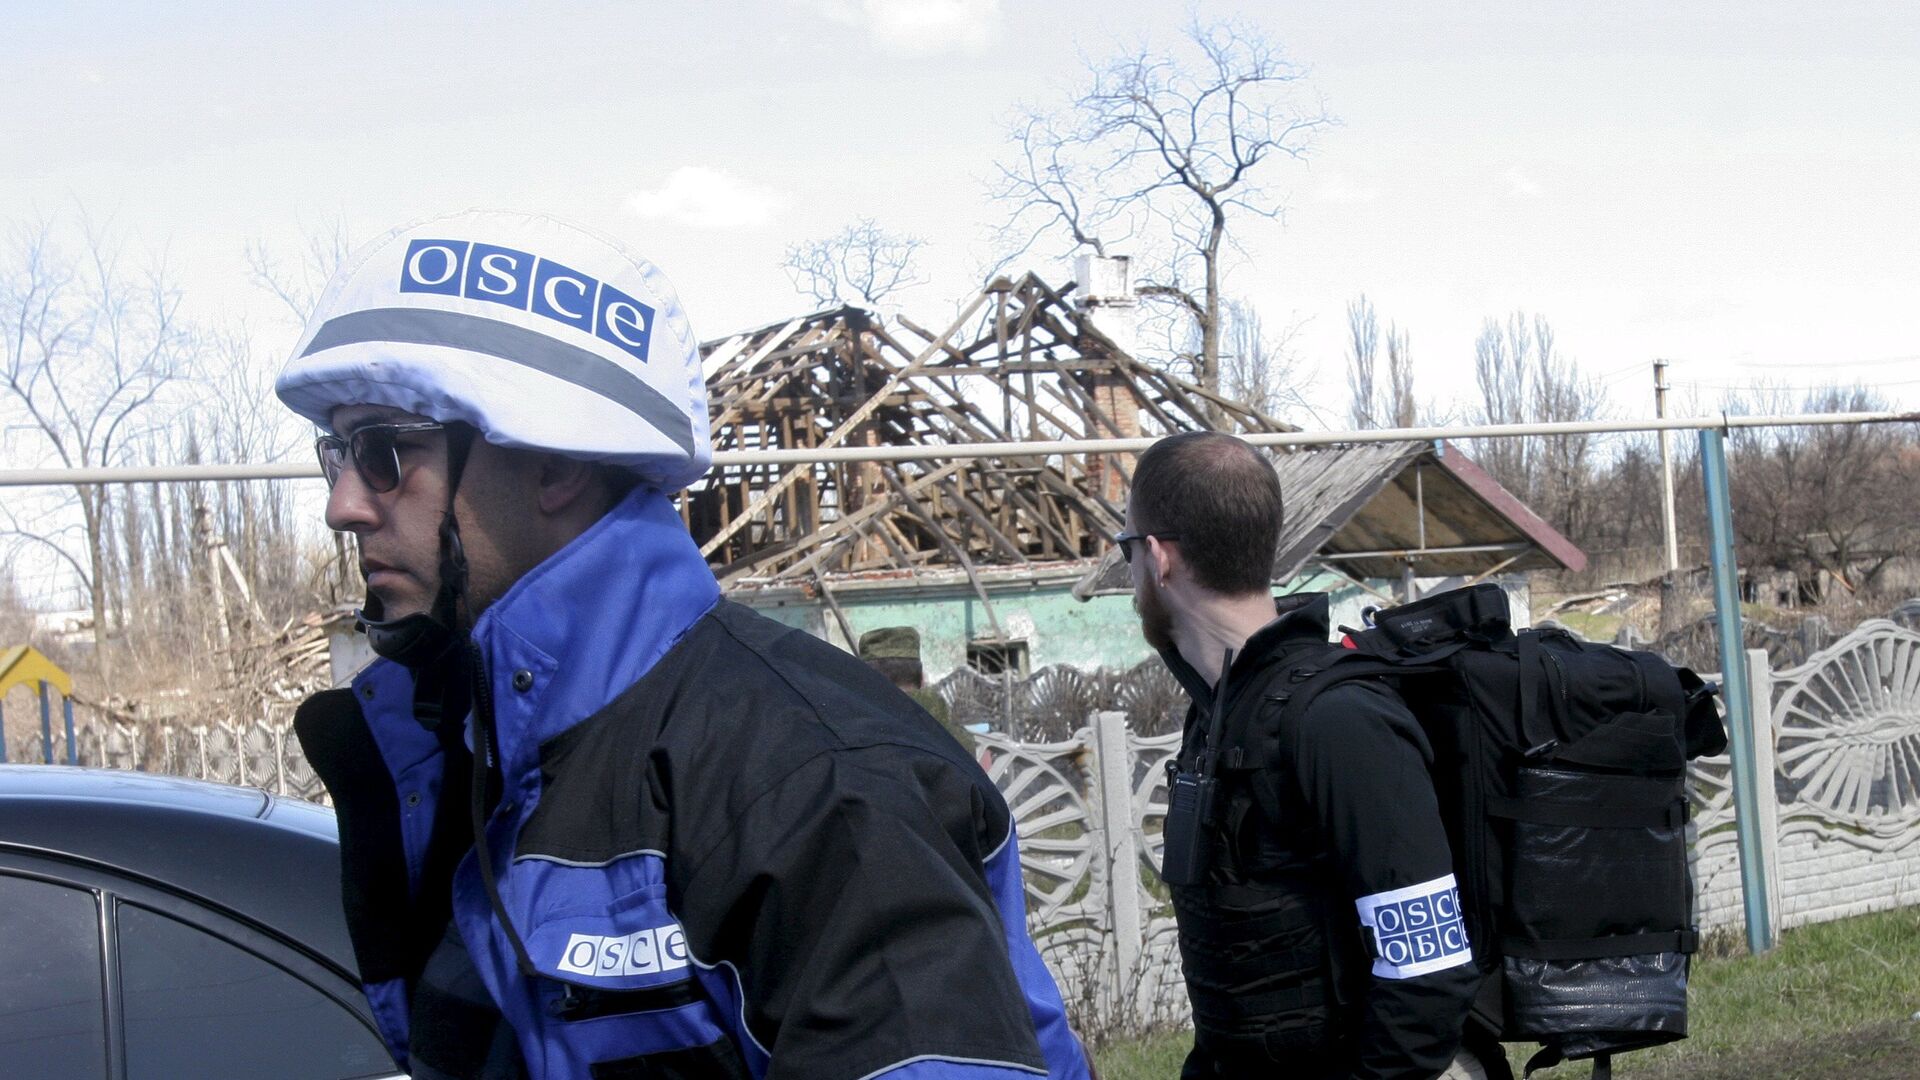 Members of the Special Monitoring Mission of the Organization for Security and Cooperation (OSCE) to Ukraine walk past a house damaged by shelling, in the village of Spartak outside Donetsk April 10, 2015 - Sputnik International, 1920, 13.02.2022